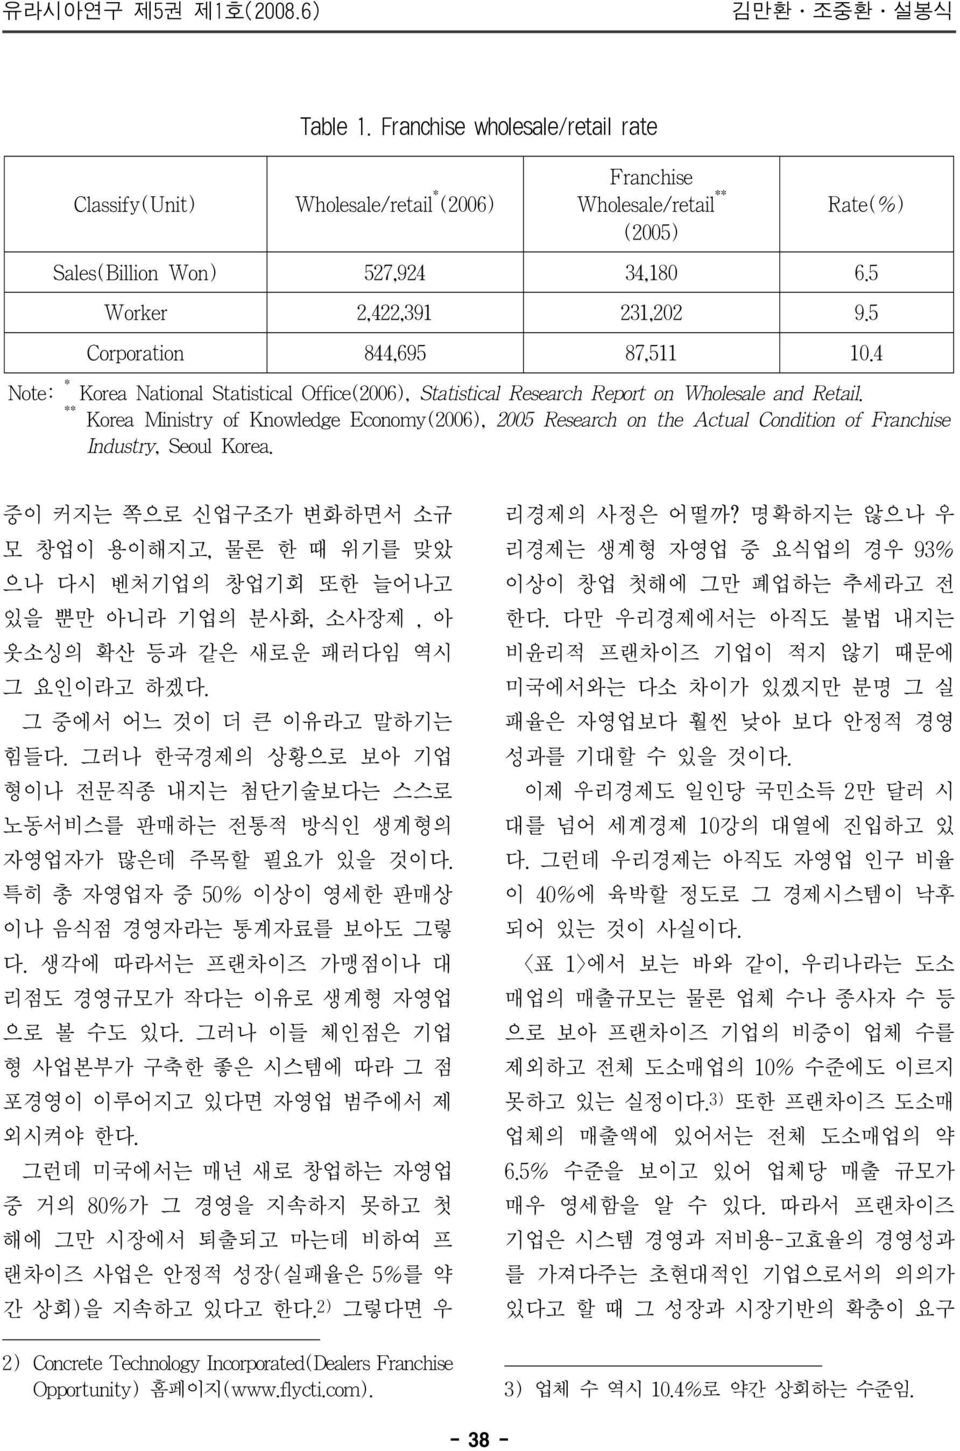 ** Korea Ministry of Knowledge Economy(2006), 2005 Research on the Actual Condition of Franchise Industry, Seoul Korea.